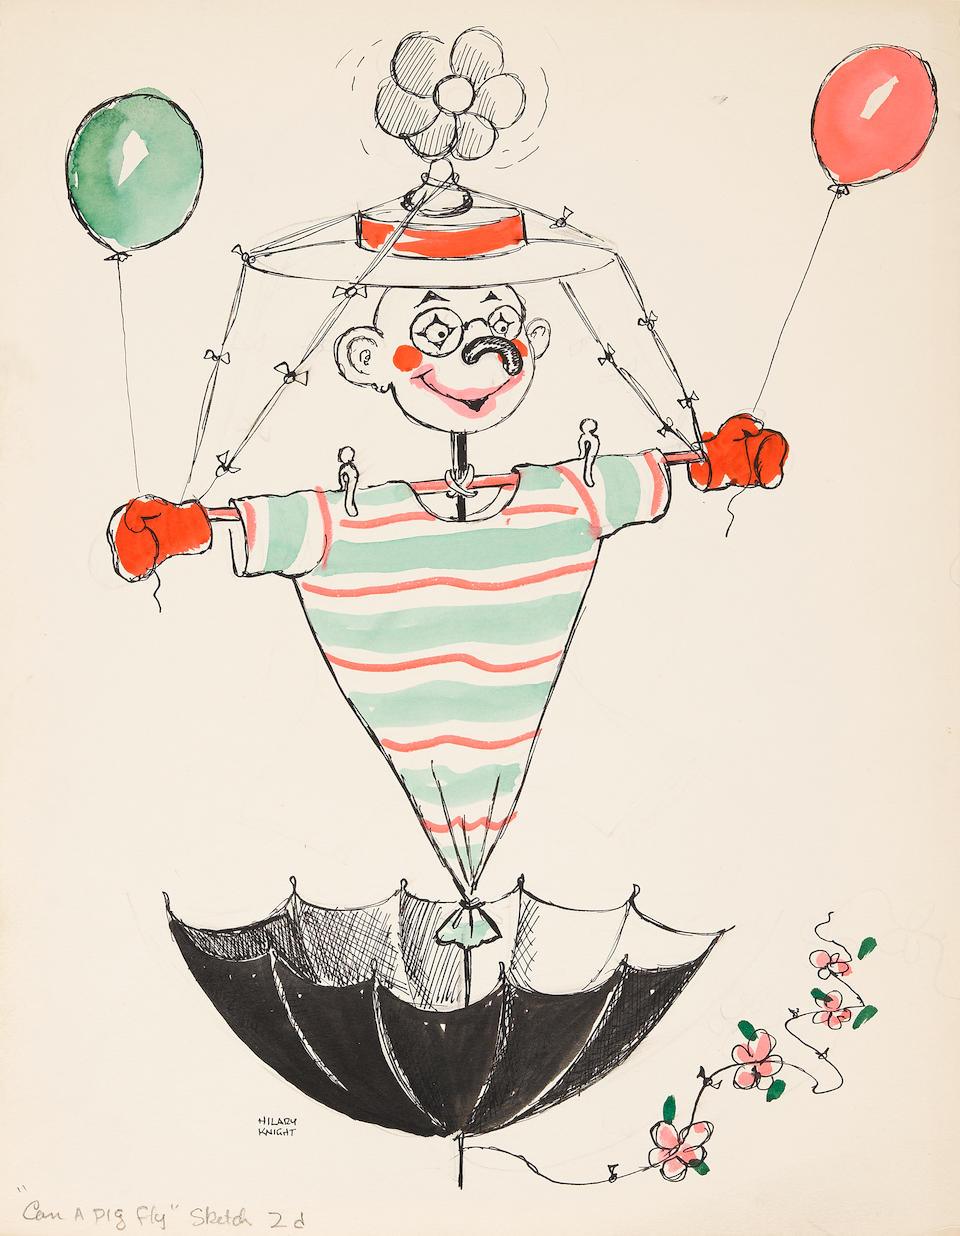 ARCHIVE OF ORIGINAL ART FOR AN UNREALIZED HILARY KNIGHT COLLABORATION WITH TRUMAN CAPOTE, CAN A PIG FLY?  Capote, Truman. 1924-1984. Knight, Hilary, illus. Eight original artworks by Knight for an unpublished picture book in the Random House "Beginner Books" series,